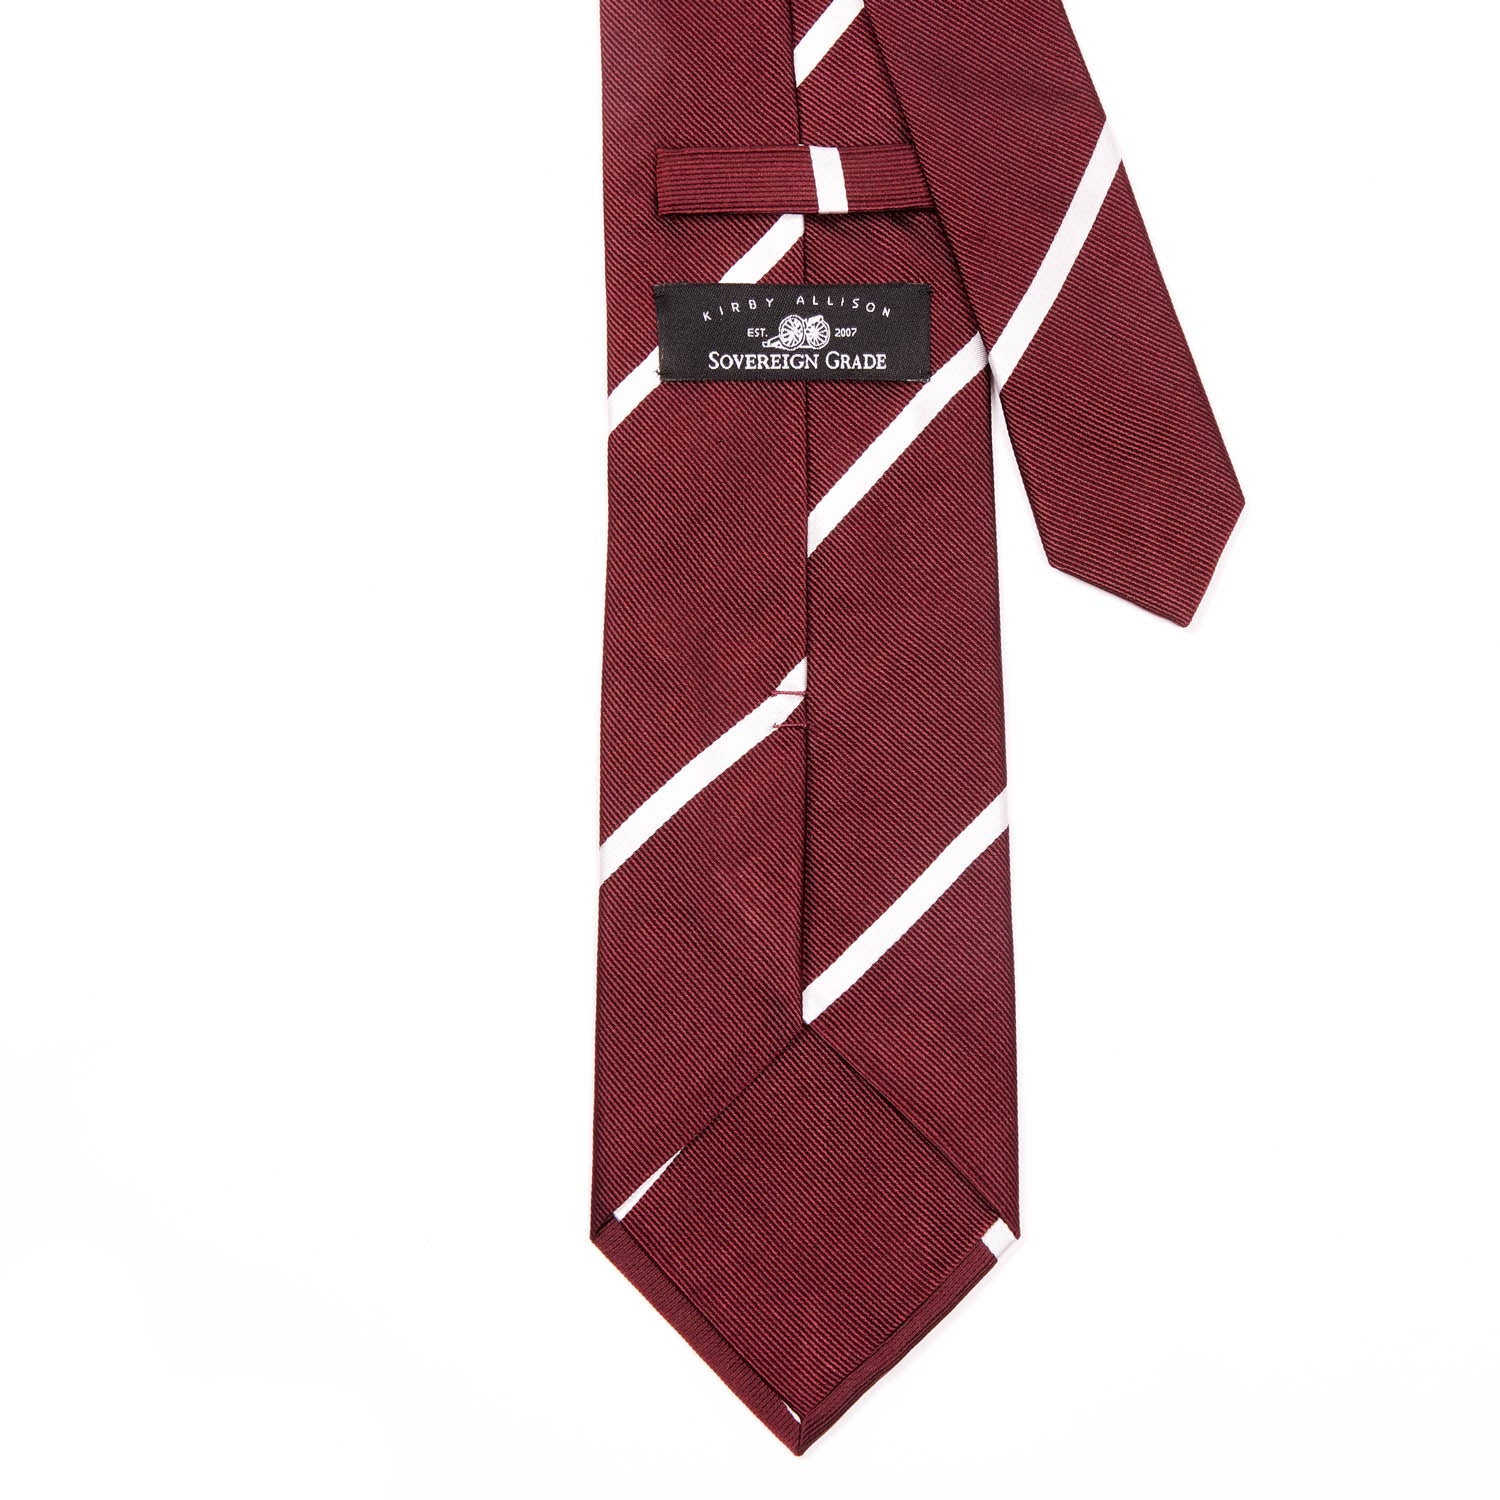 A Sovereign Grade Oxblood Narrow Rep Tie, 150 cm from KirbyAllison.com with premium linings on a white background.